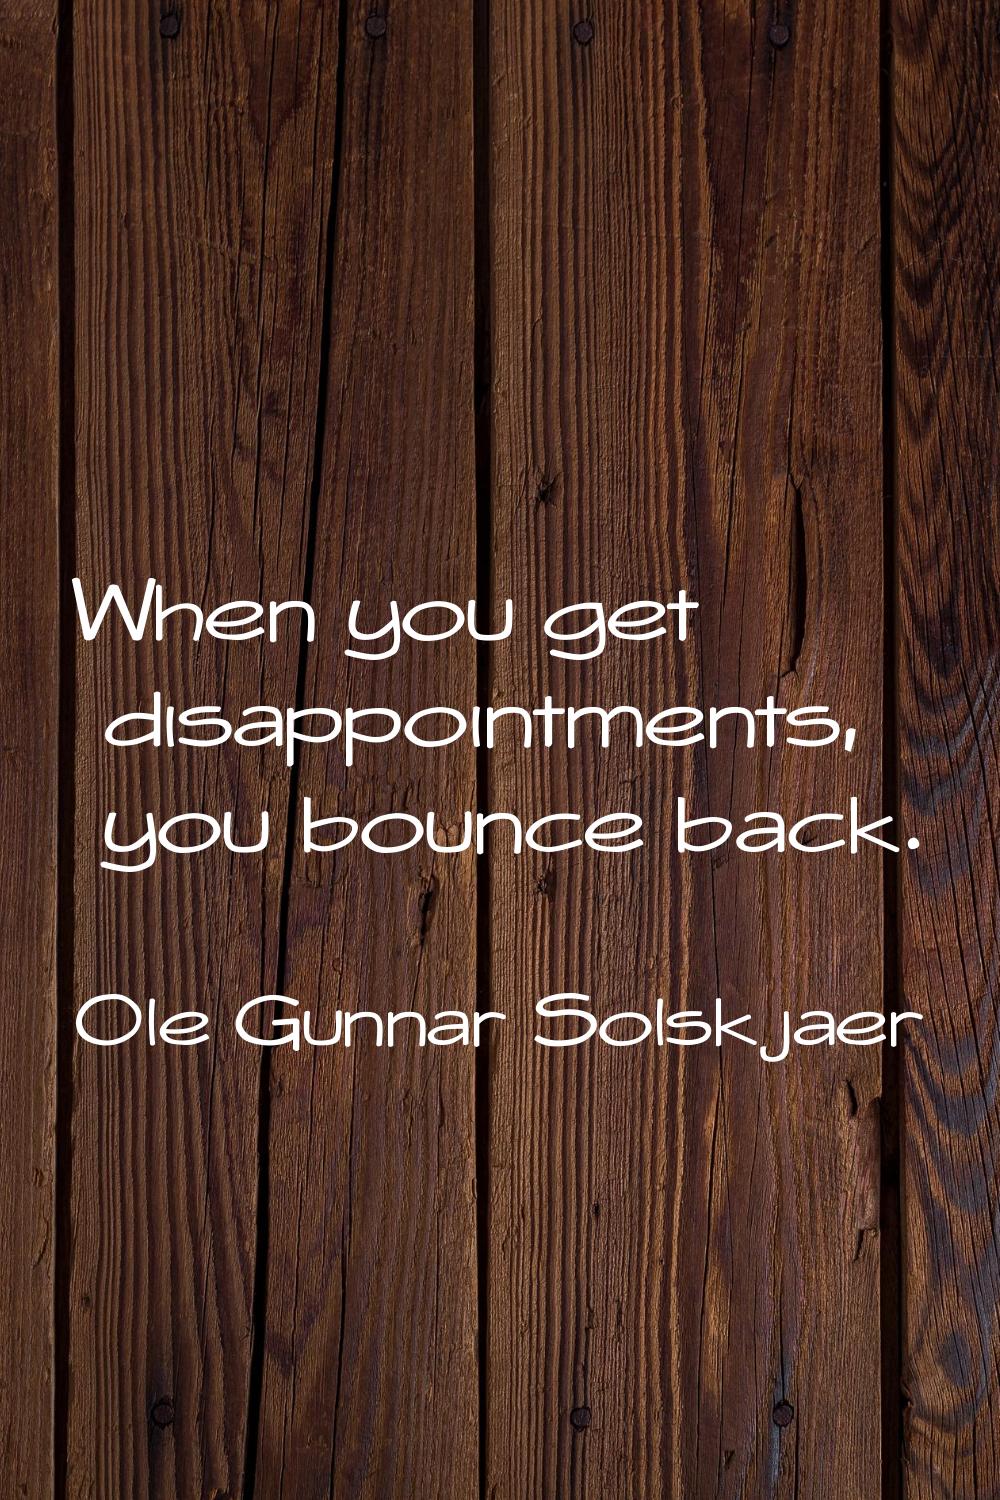 When you get disappointments, you bounce back.